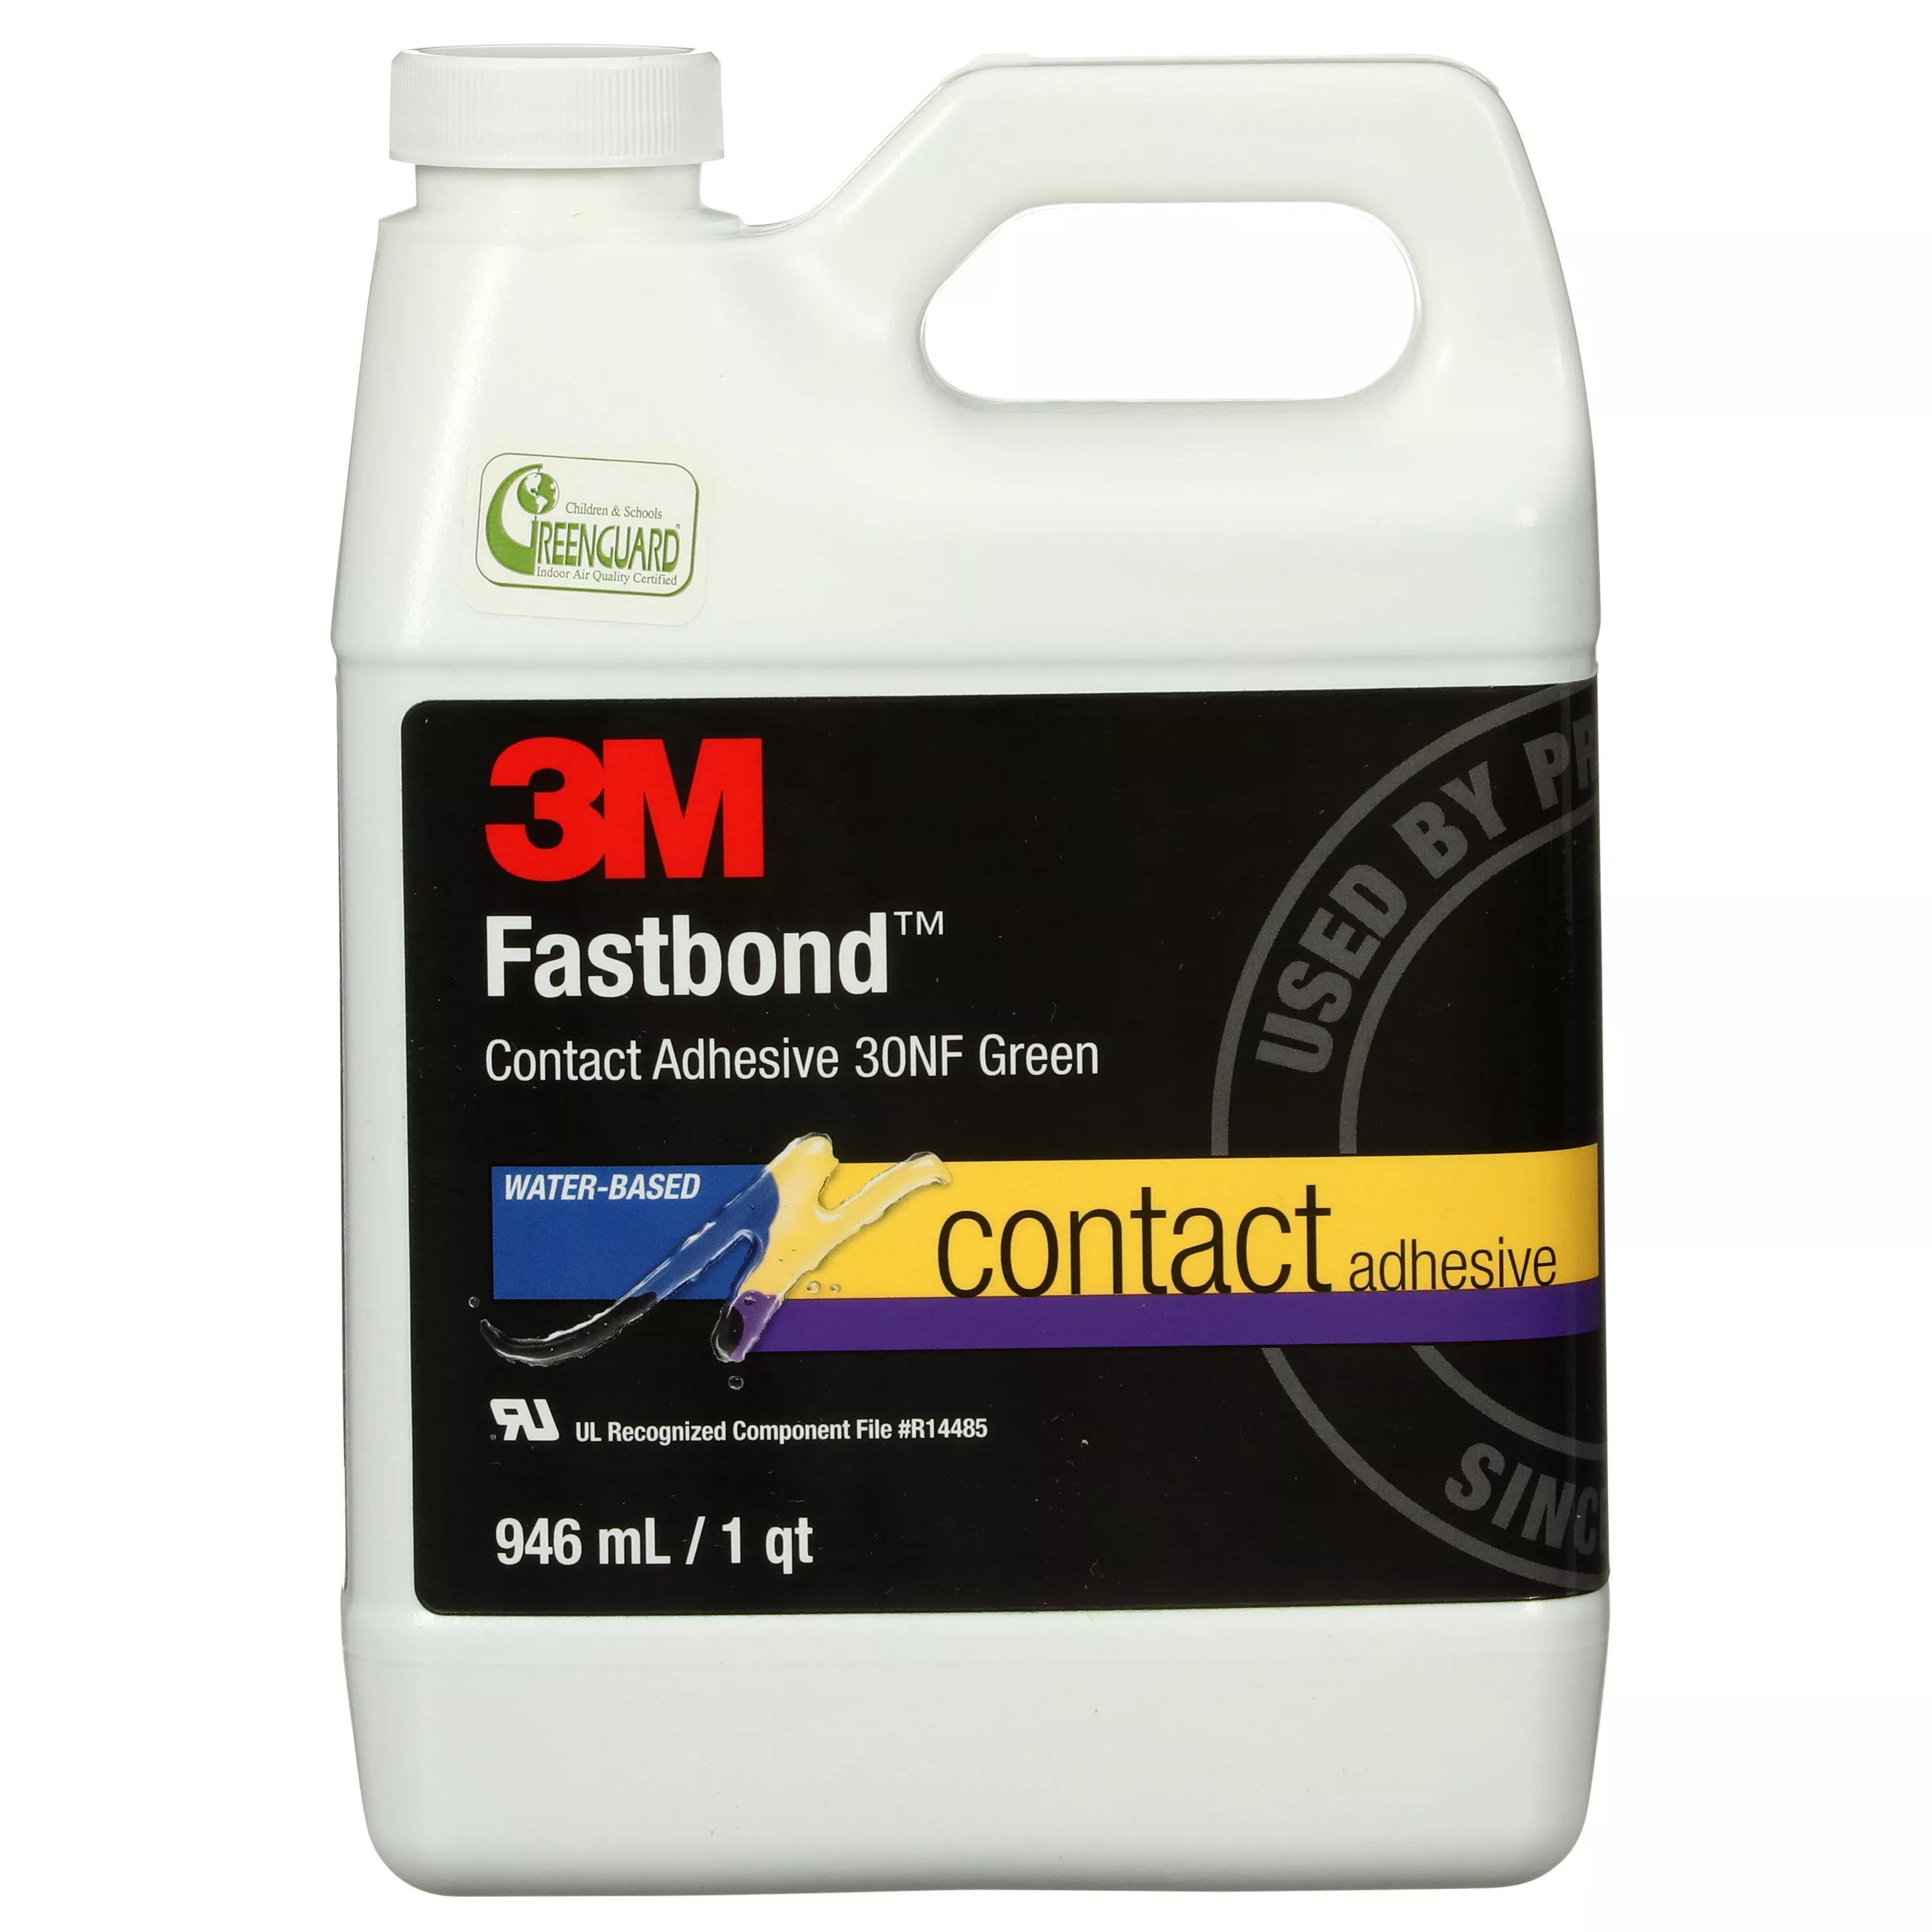 3M™ Fastbond™ Contact Adhesive 30NF, Green, 1 Quart, 1 Can/Case